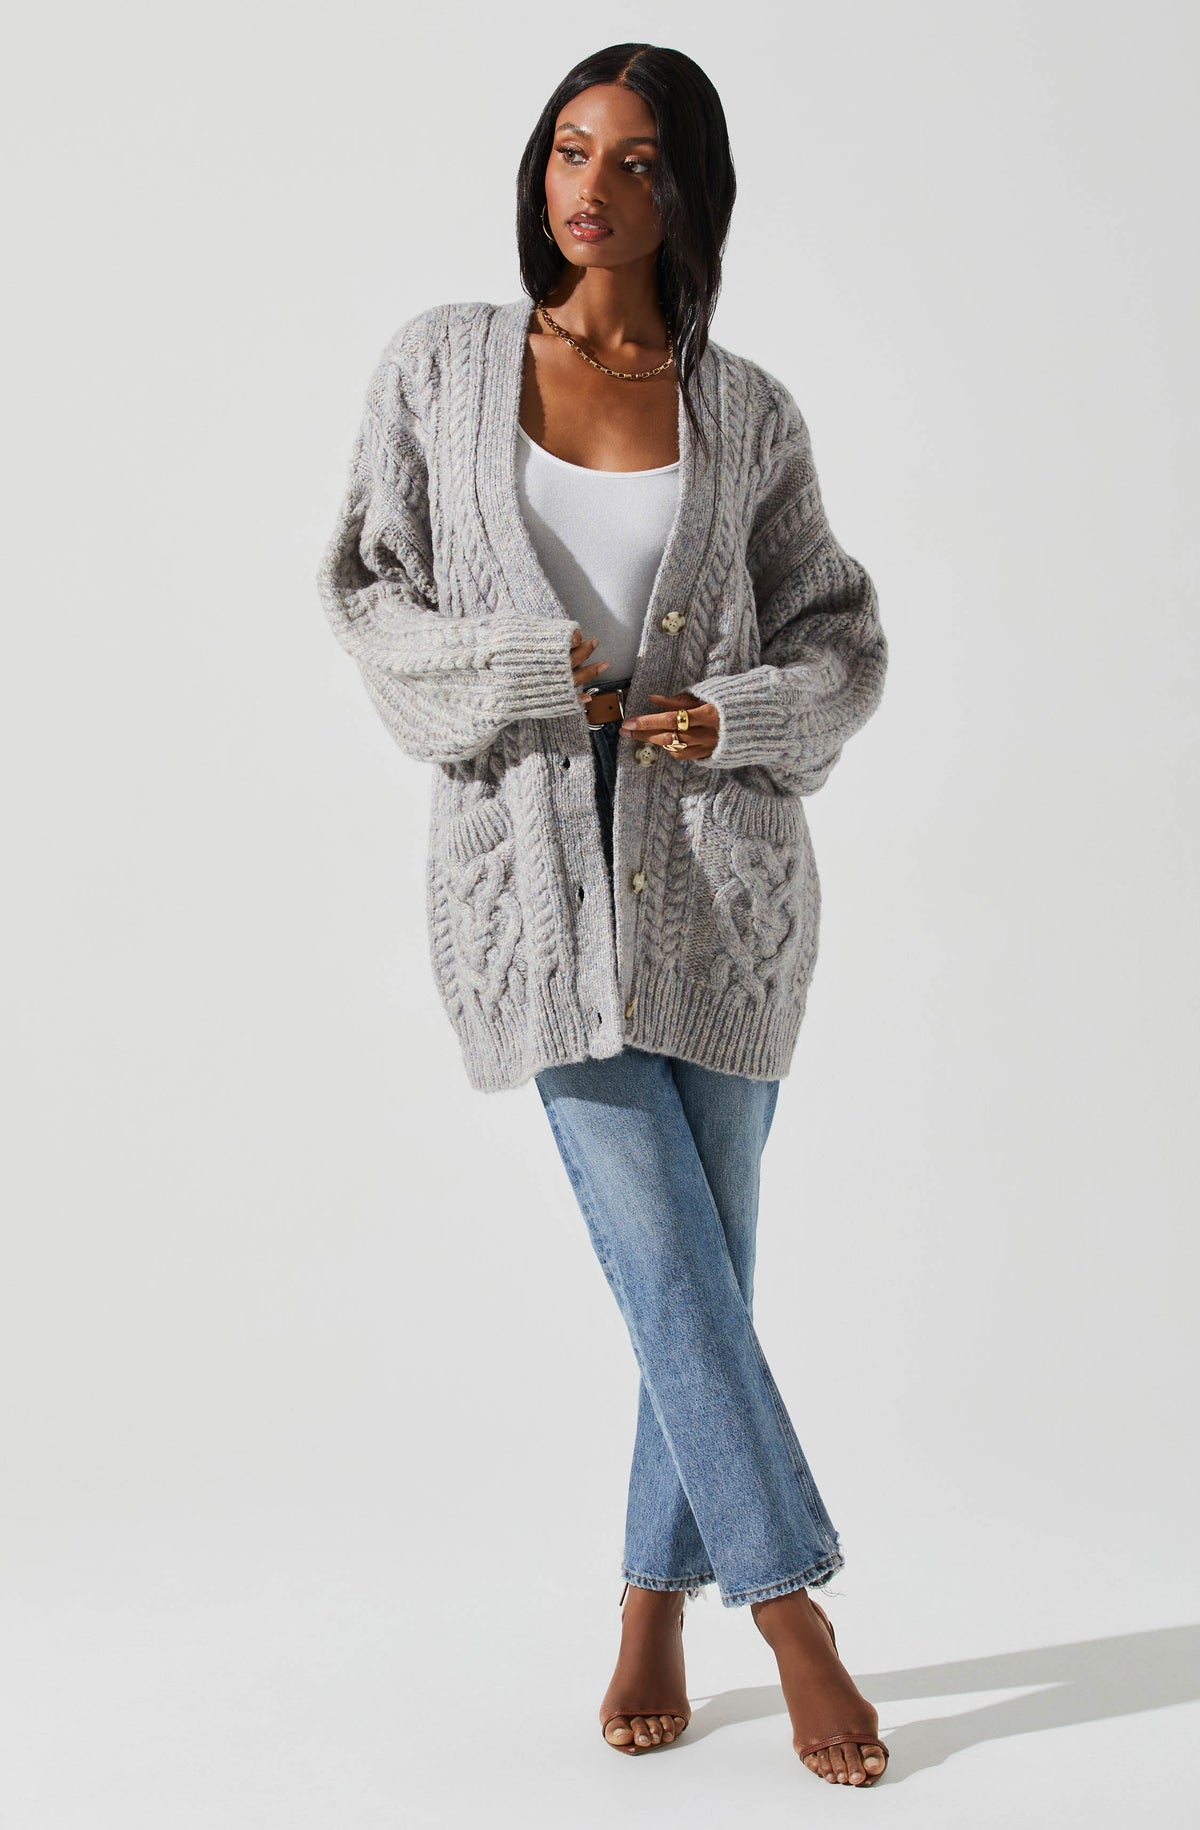 Dropship Women's Oversized Open Front Long Sleeve Cardigan Sweaters Cable  Twist Knit Boyfriend Loose Outwear to Sell Online at a Lower Price